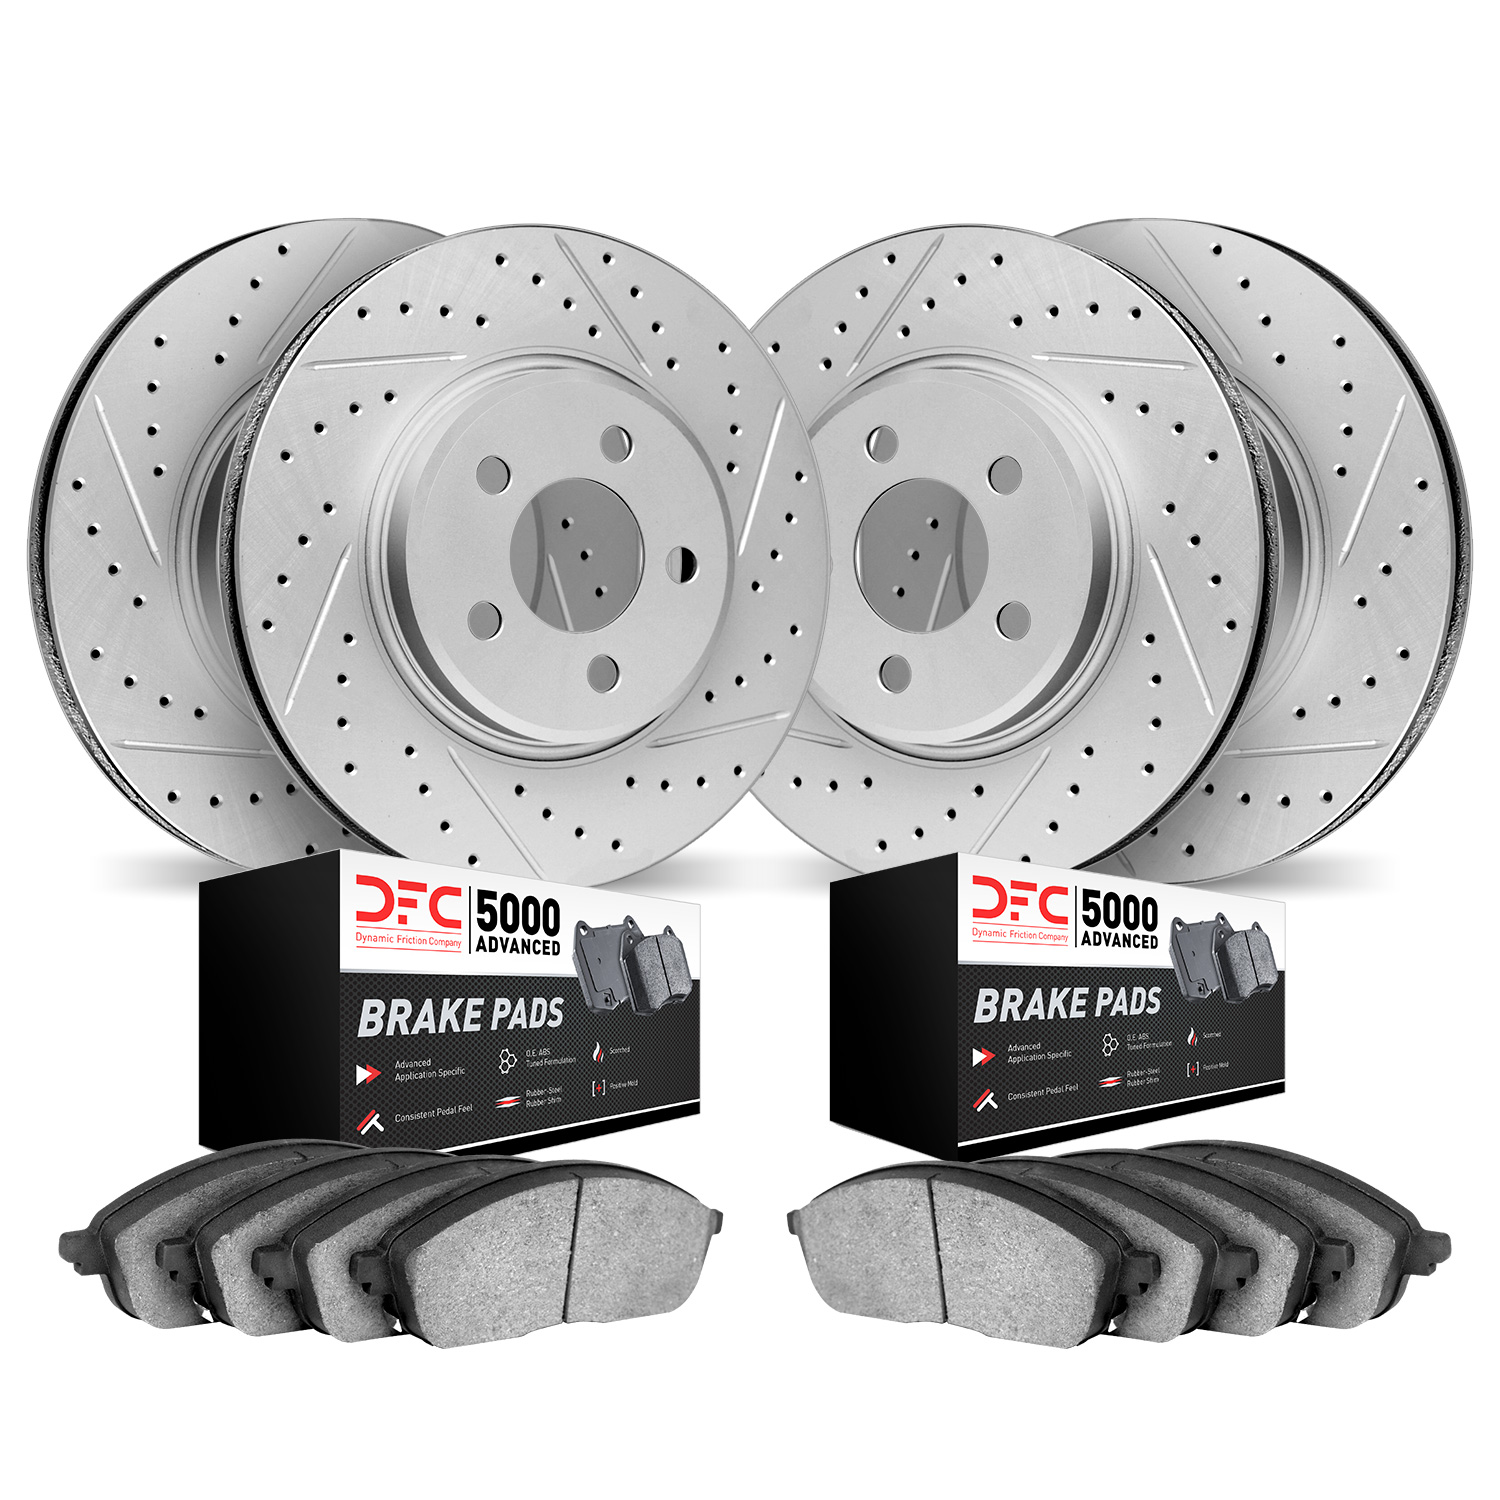 2504-74034 Geoperformance Drilled/Slotted Rotors w/5000 Advanced Brake Pads Kit, 2004-2007 Audi/Volkswagen, Position: Front and